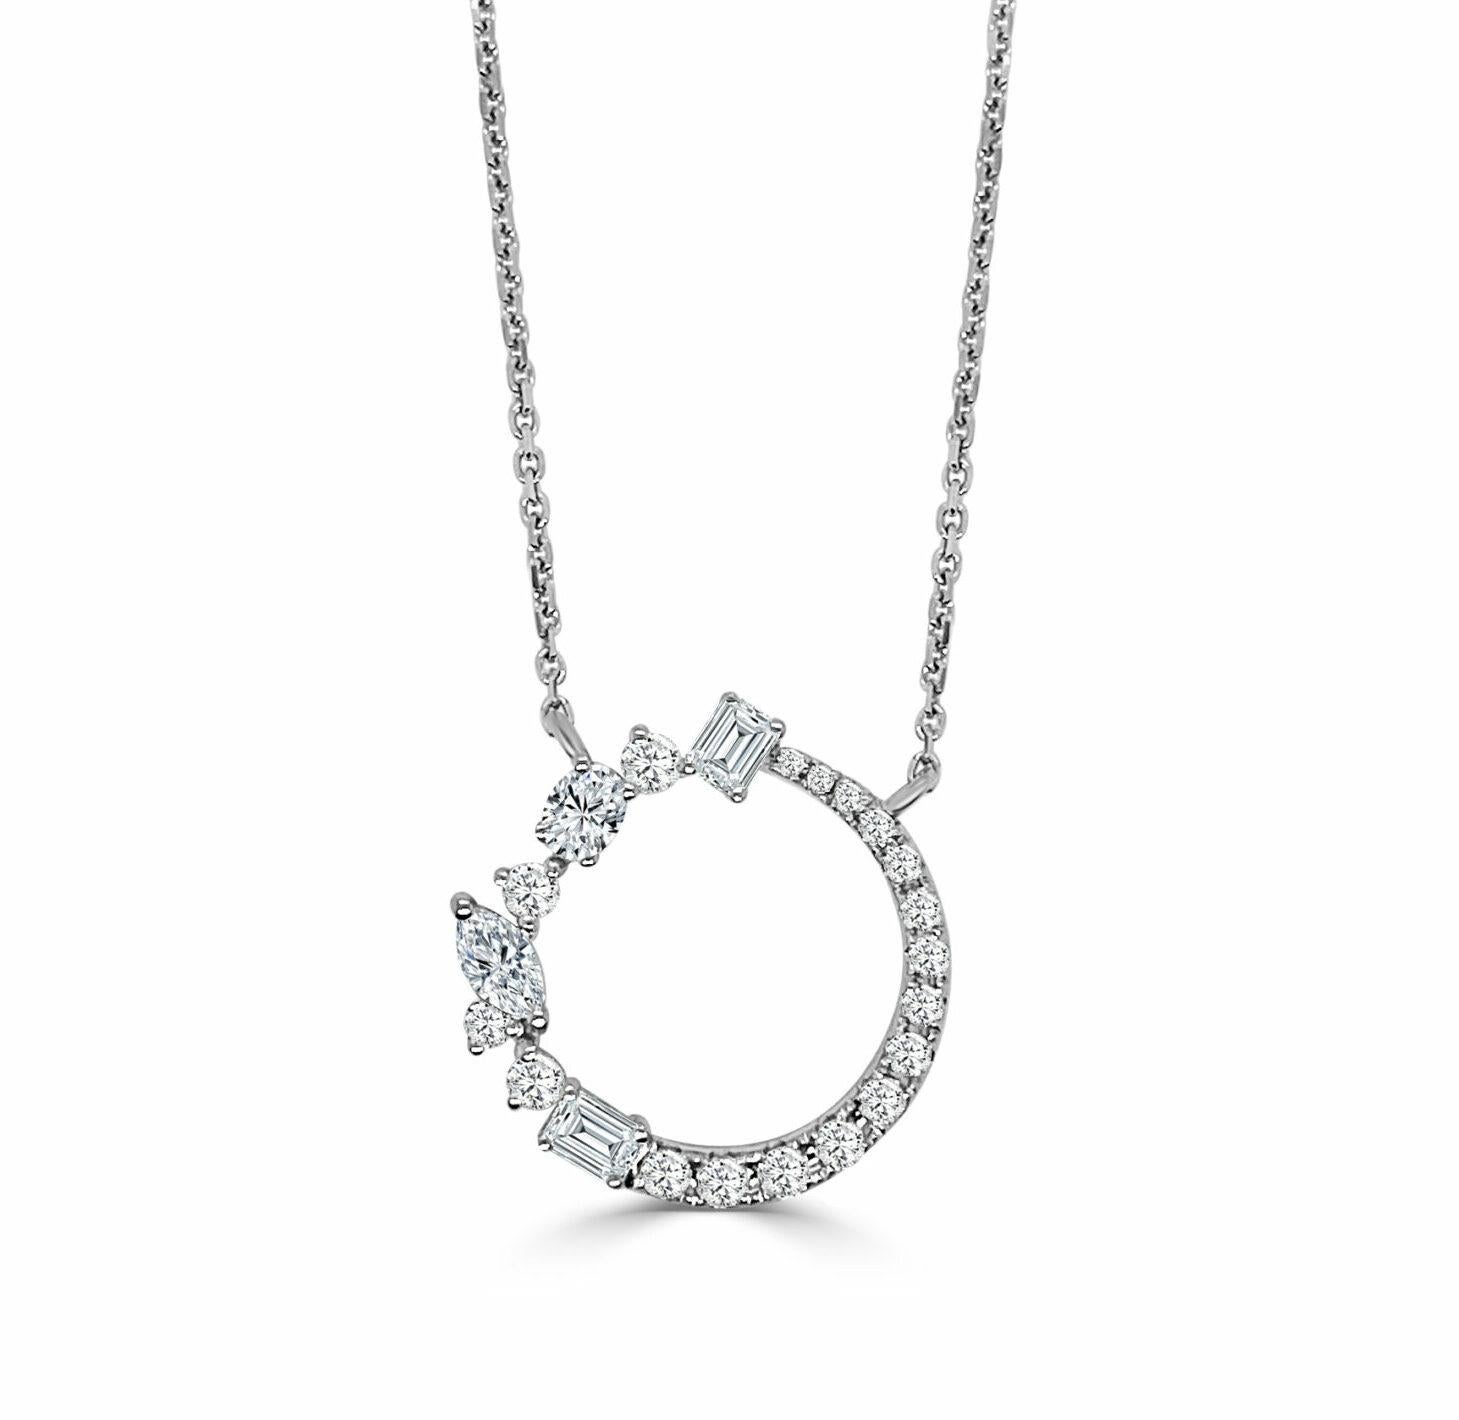 Round Emerald Cut, Marqius, Oval & Round All Diamond Pendant With Attached Chain, 0.82 Ct, (approximately 19 mm)

Available in other metal/ gemstone options: This Diamond pendant can be made in white, pink or yellow gold. 
Matching earrings, bangle